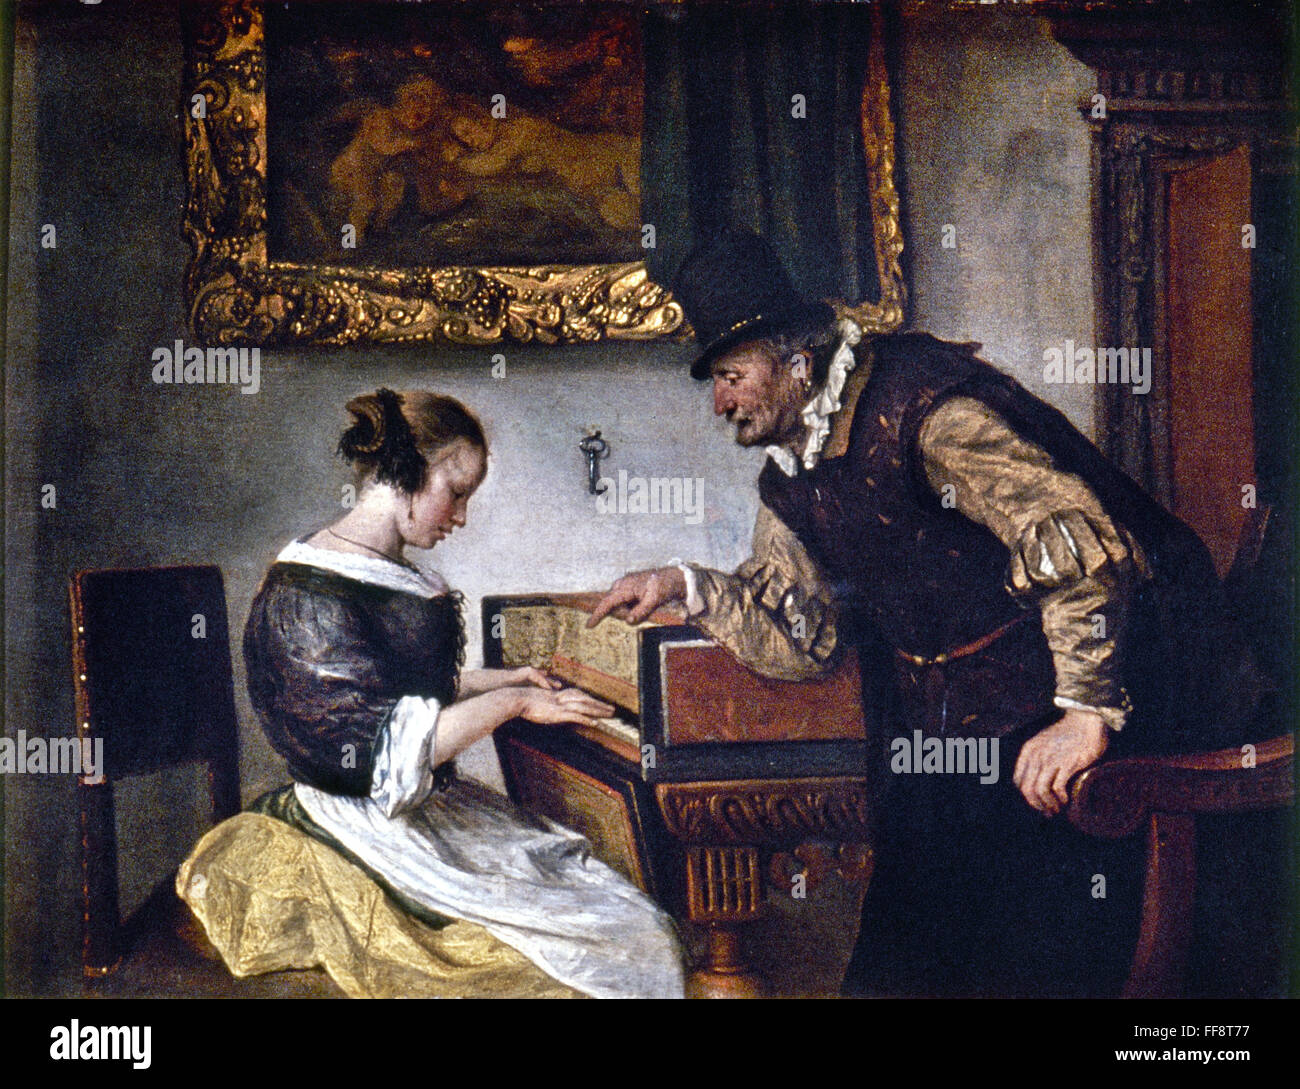 STEEN: HARPSICHORD LESSON. /nOil on canvas, by Jan Steen. Stock Photo